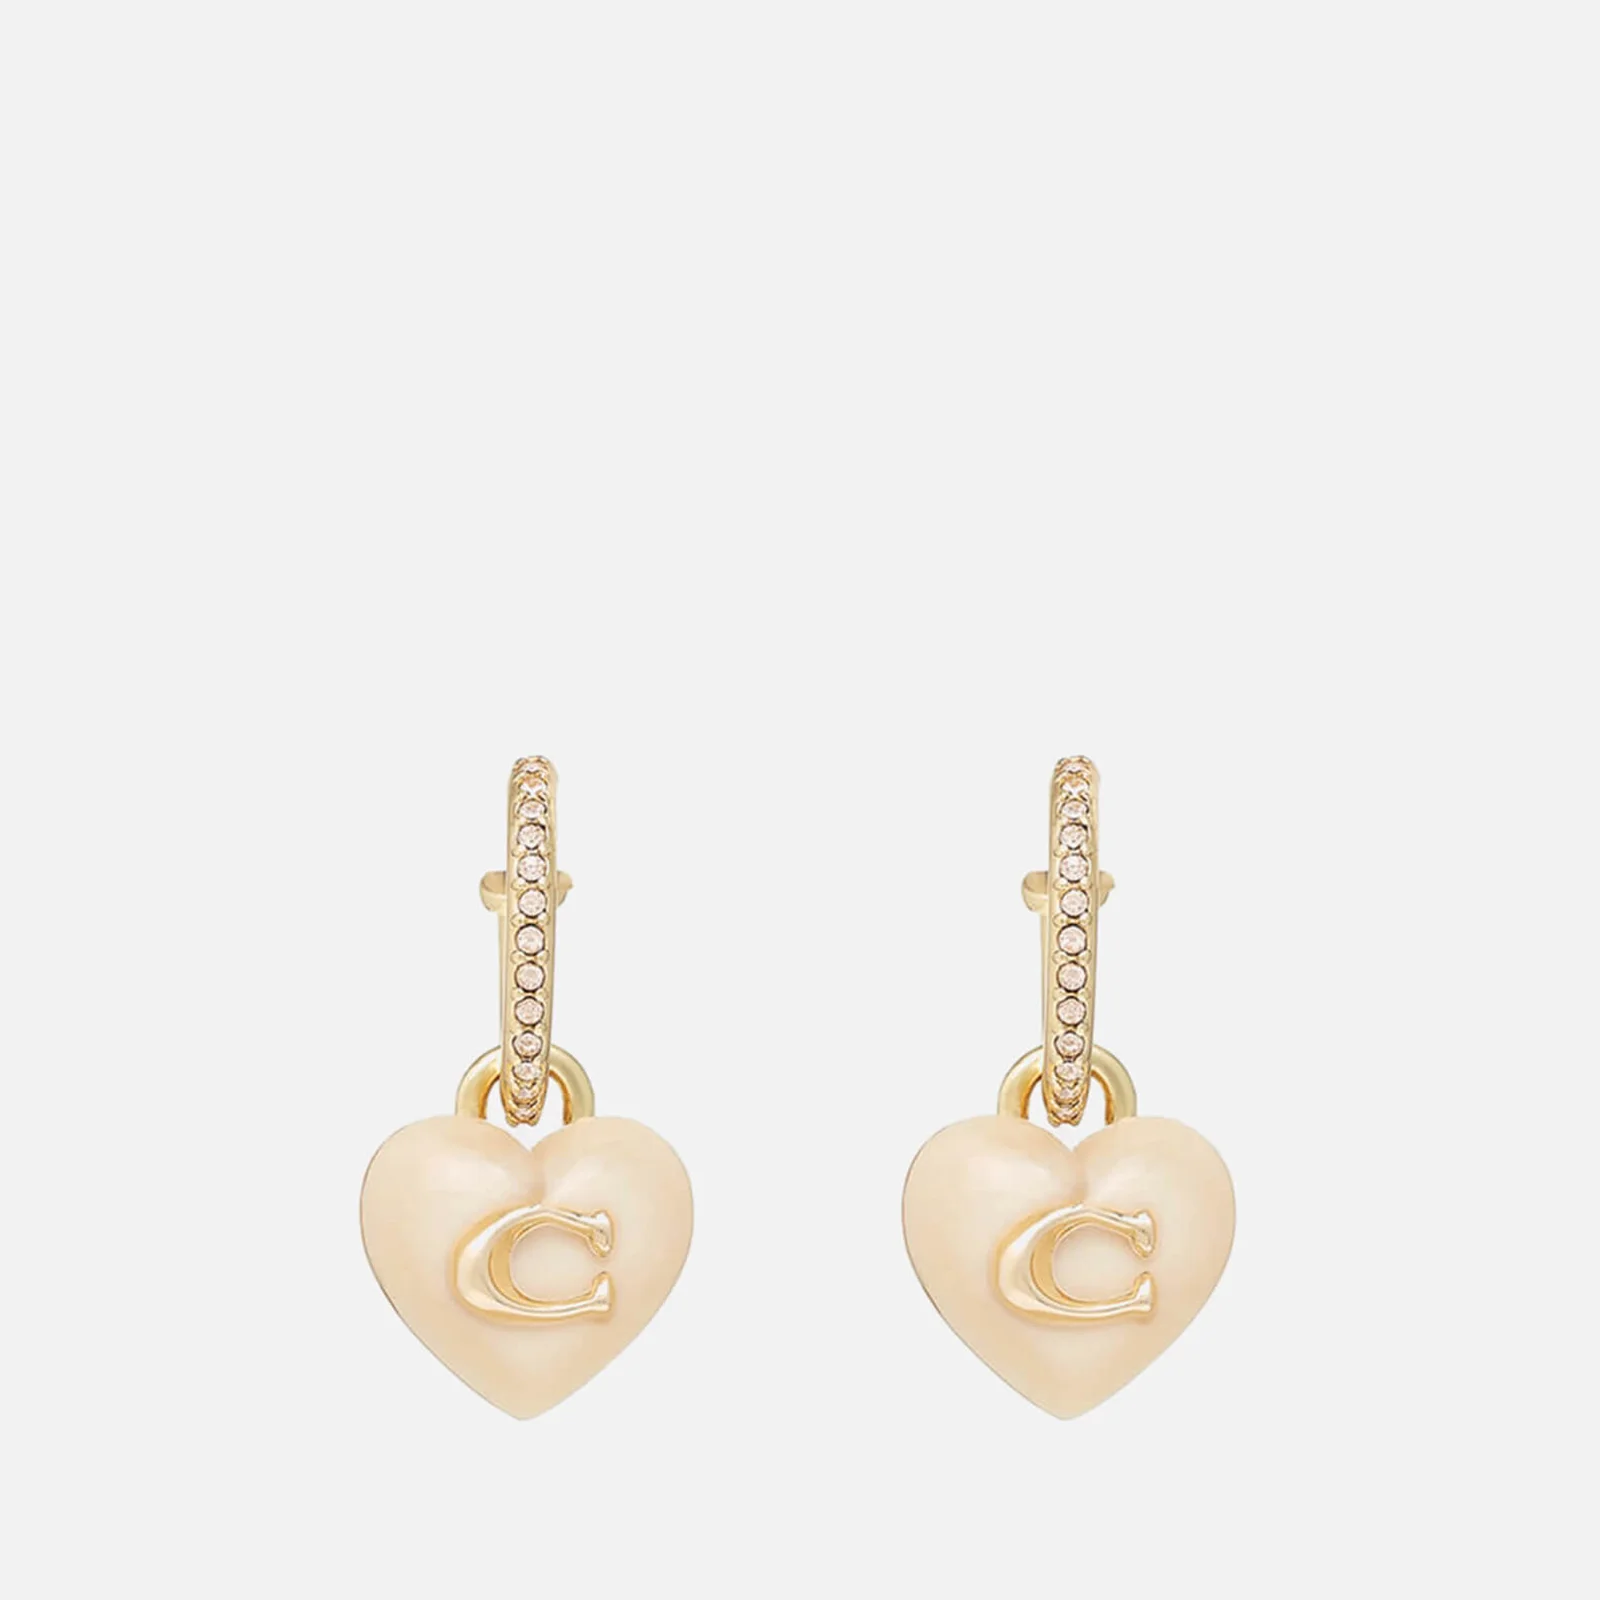 Coach C Heart Pave Gold-Tone and Resin Huggie Earrings Image 1